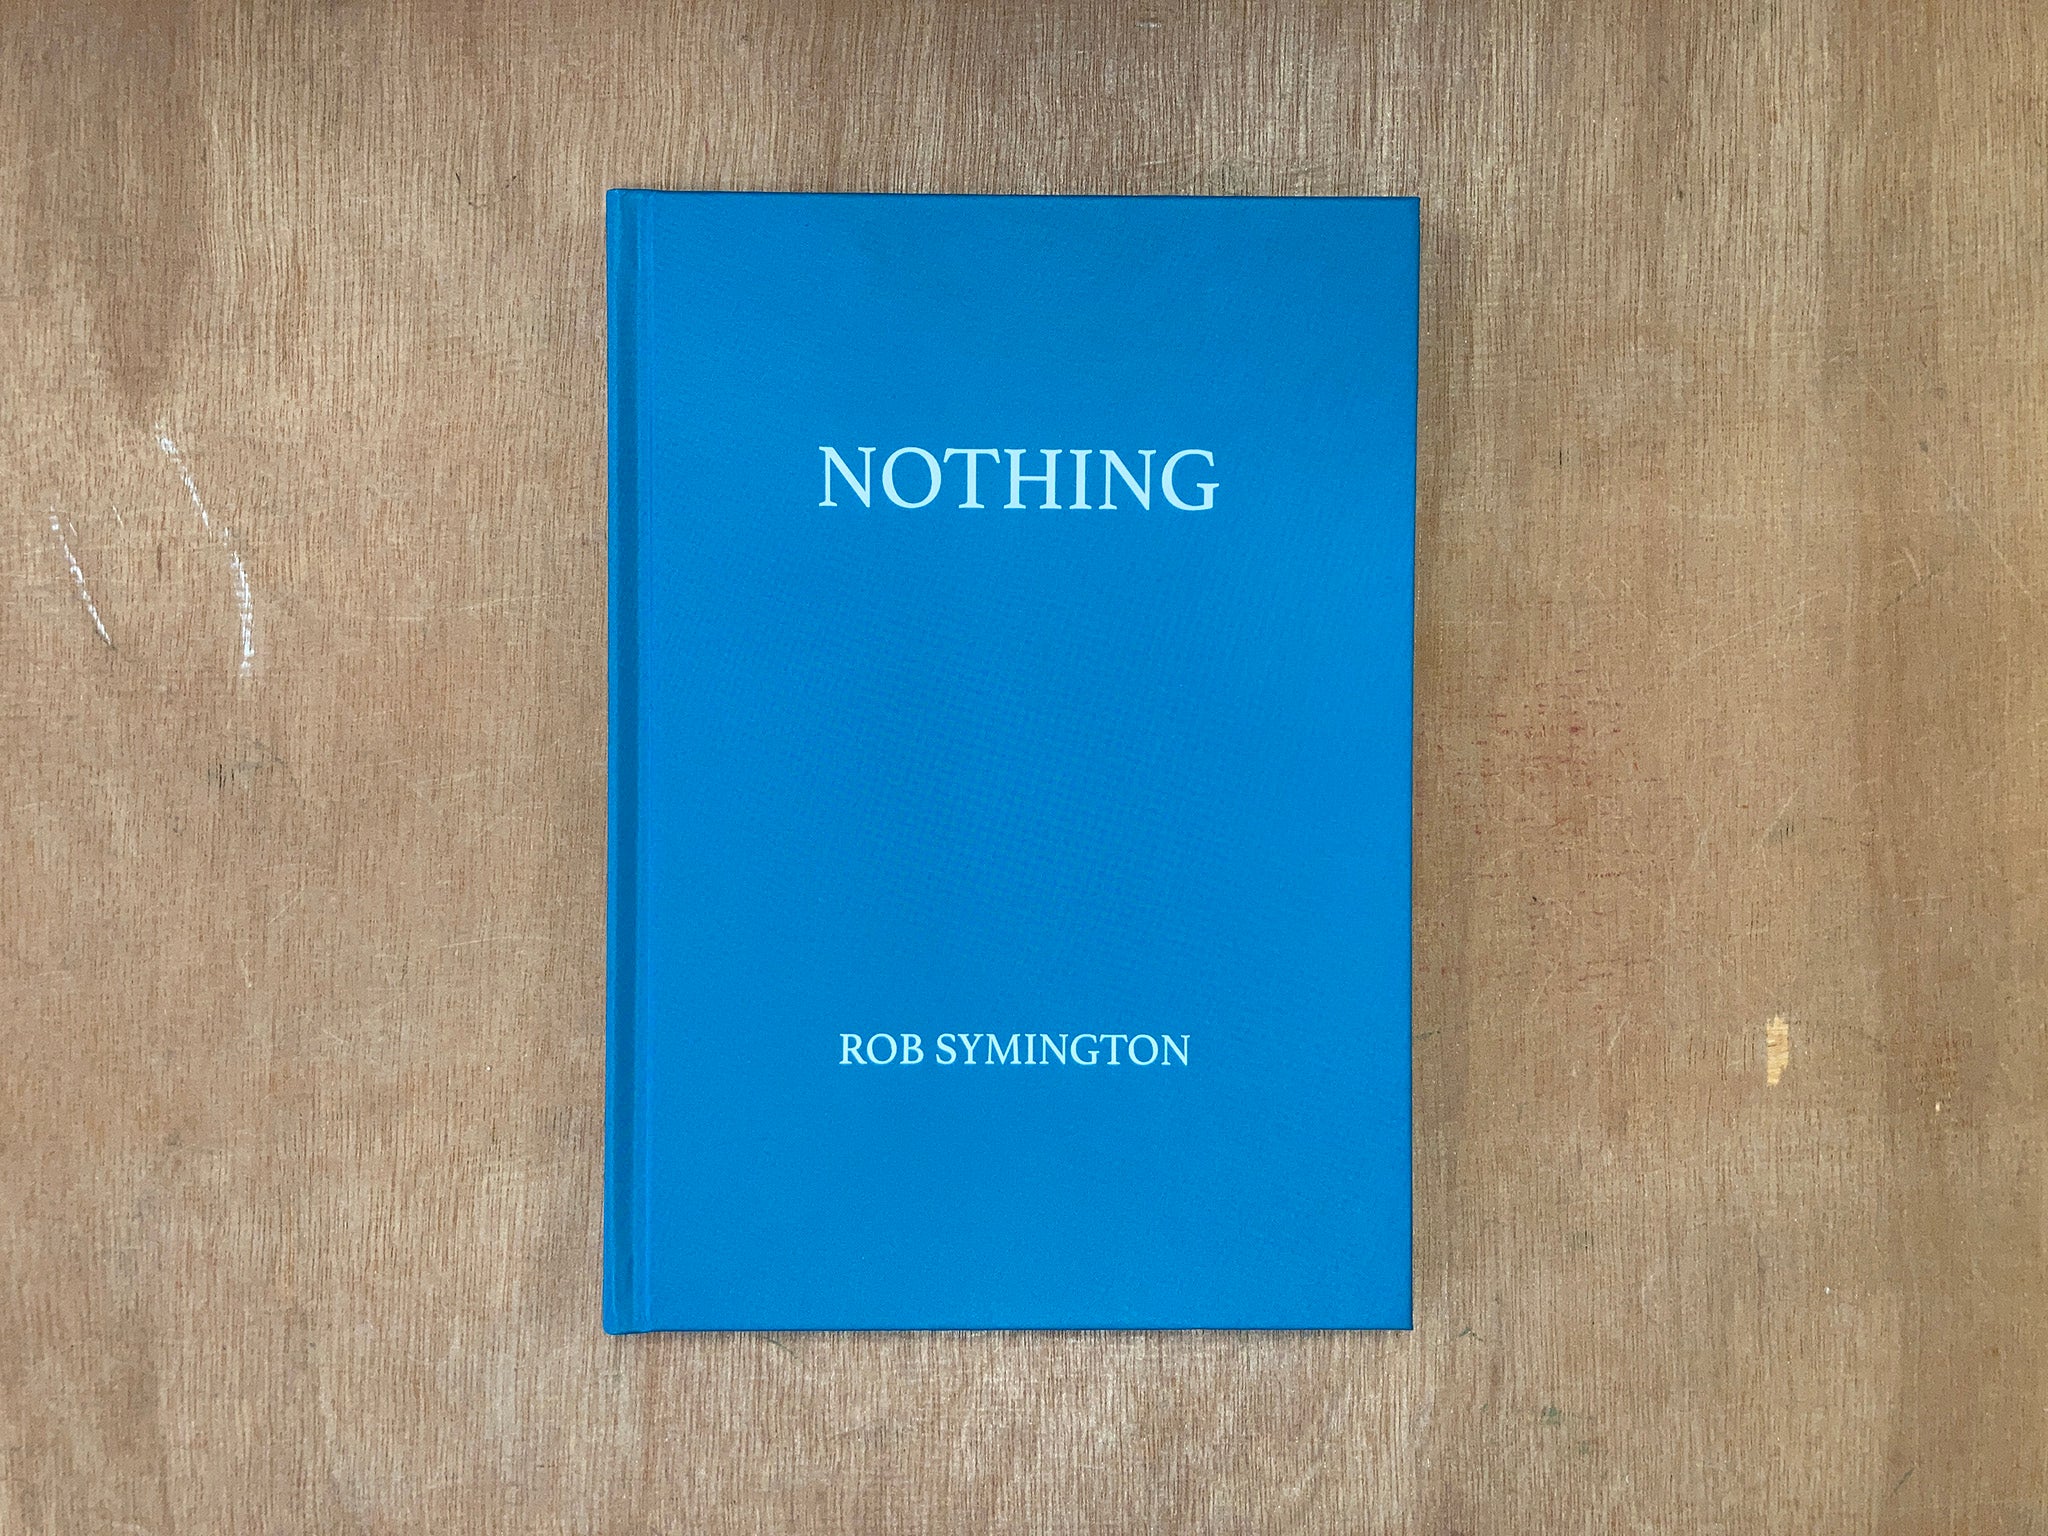 NOTHING by Rob Symington